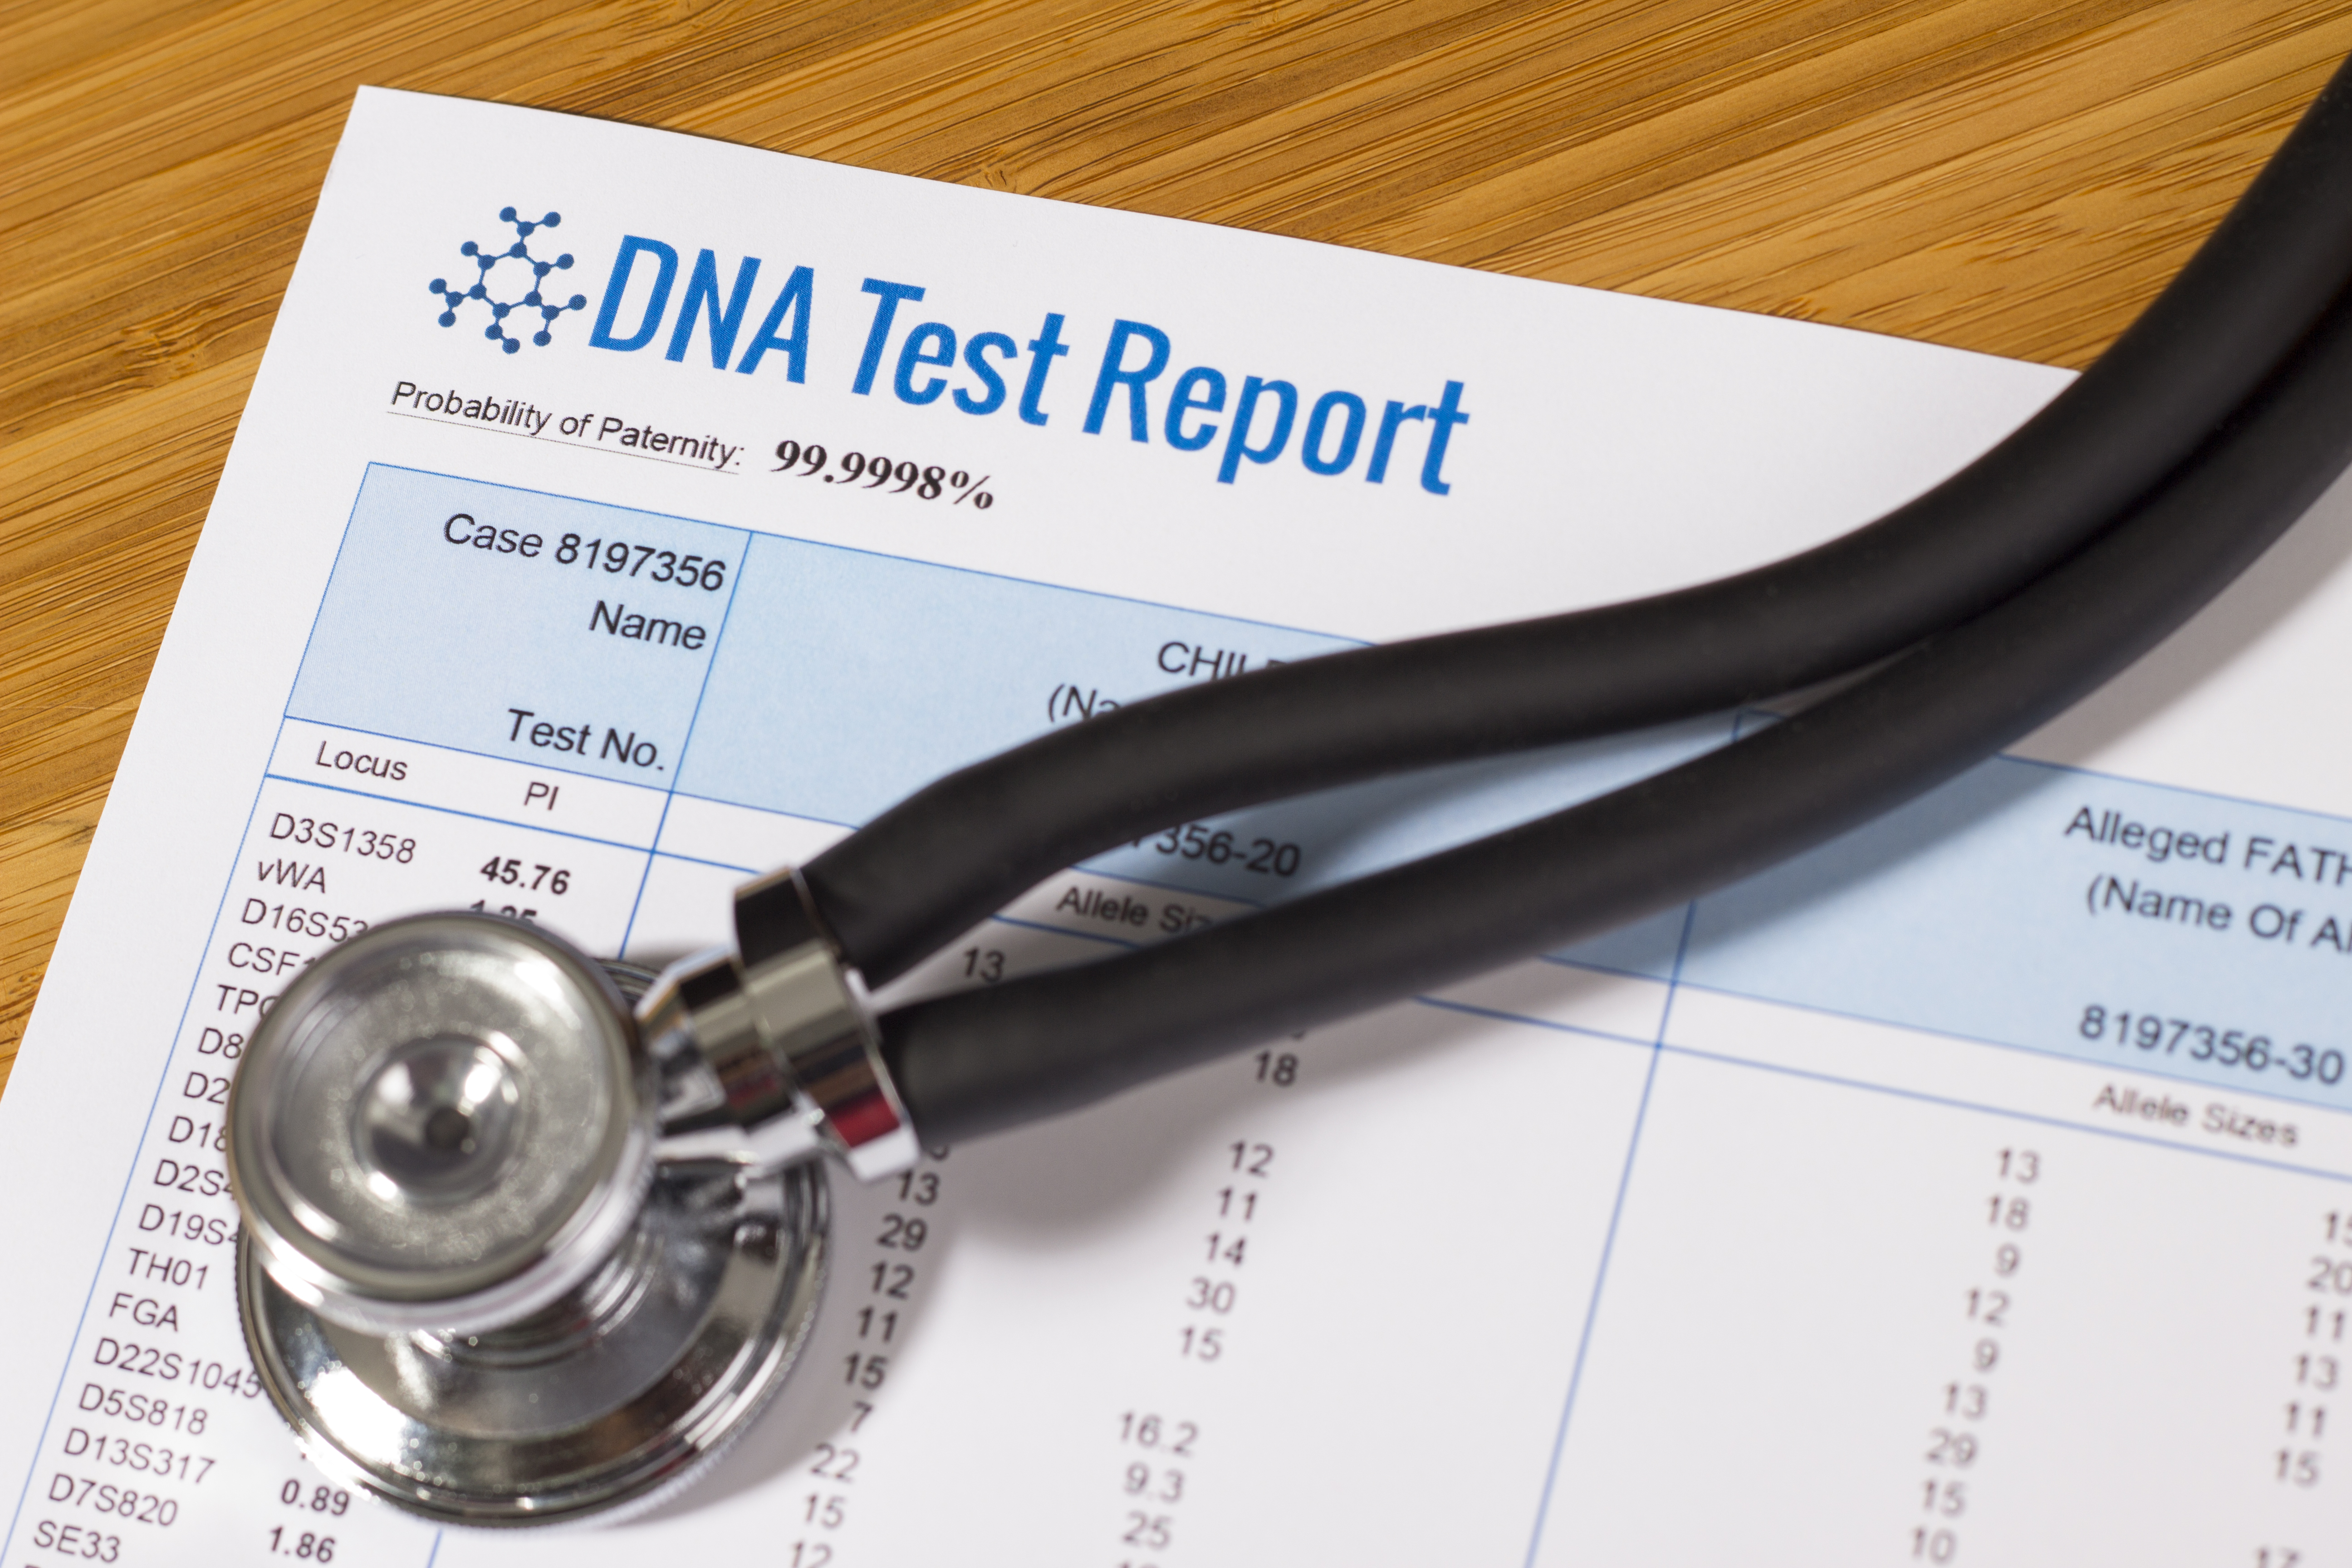 A stethoscope placed above a DNA test report | Source: Shutterstock